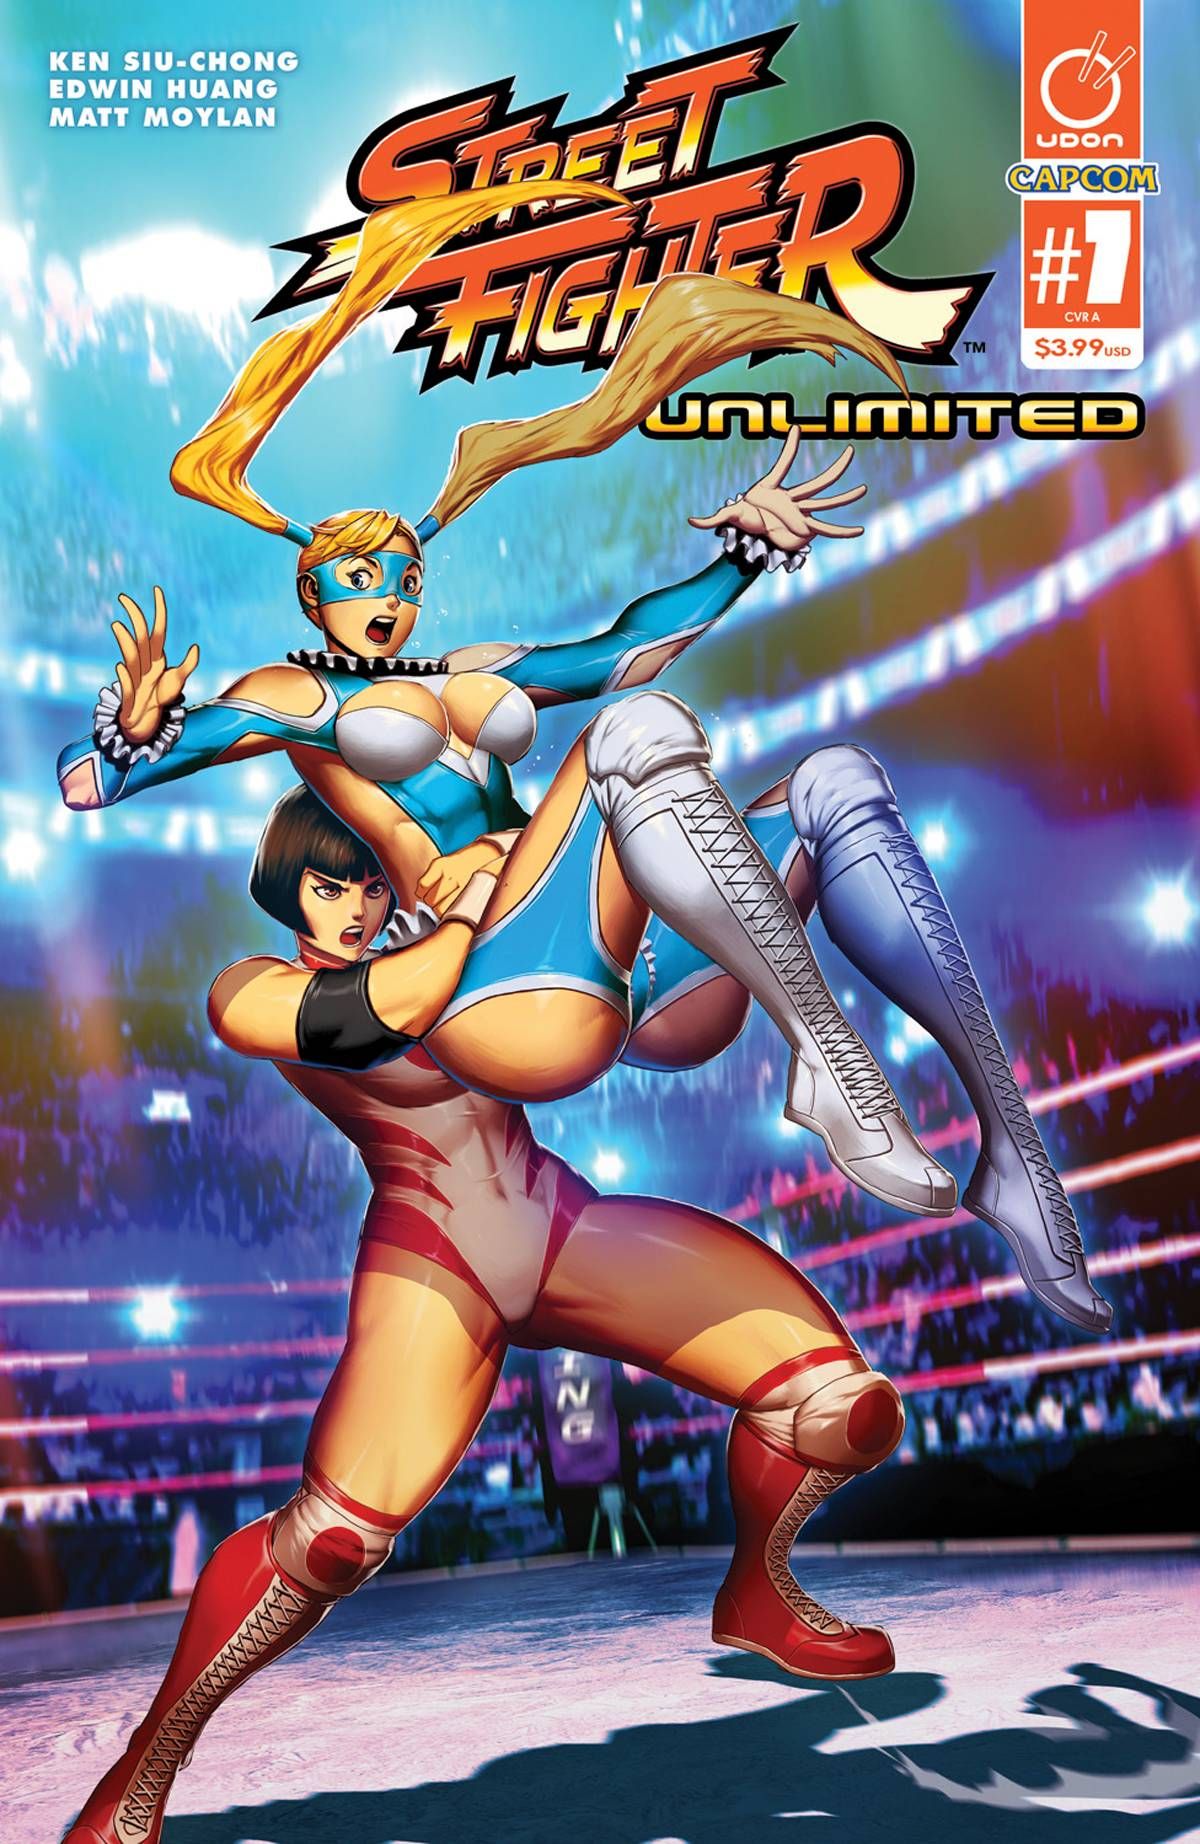 Street Fighter Unlimited #7 Comic